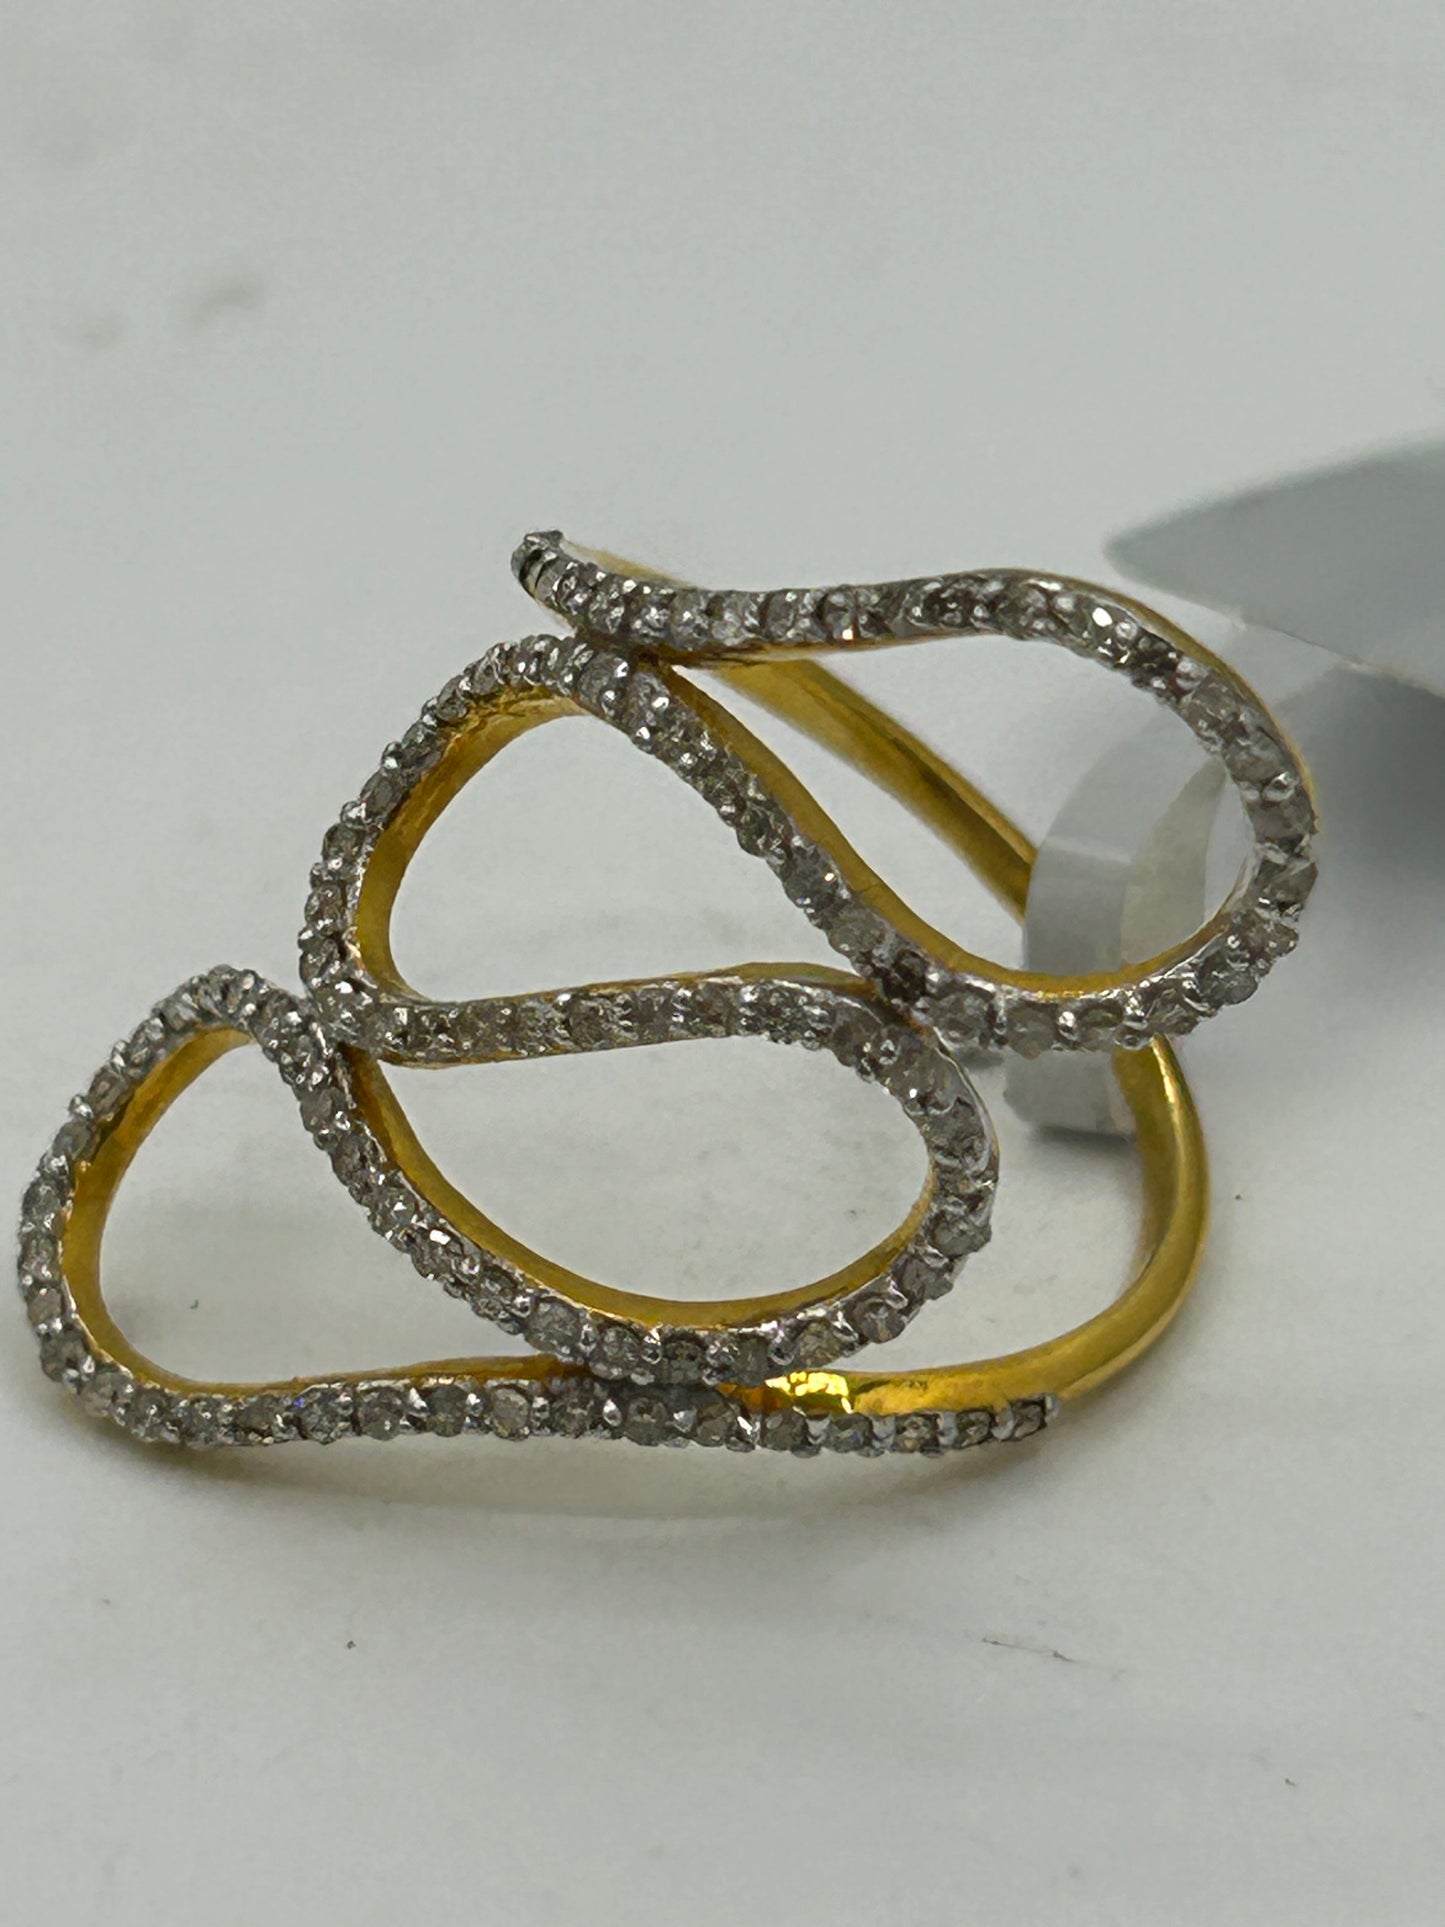 14k Solid Gold Diamond Rings. Genuine handmade pave diamond Rings. Approx Size 1.20 "(15 x 30 mm)